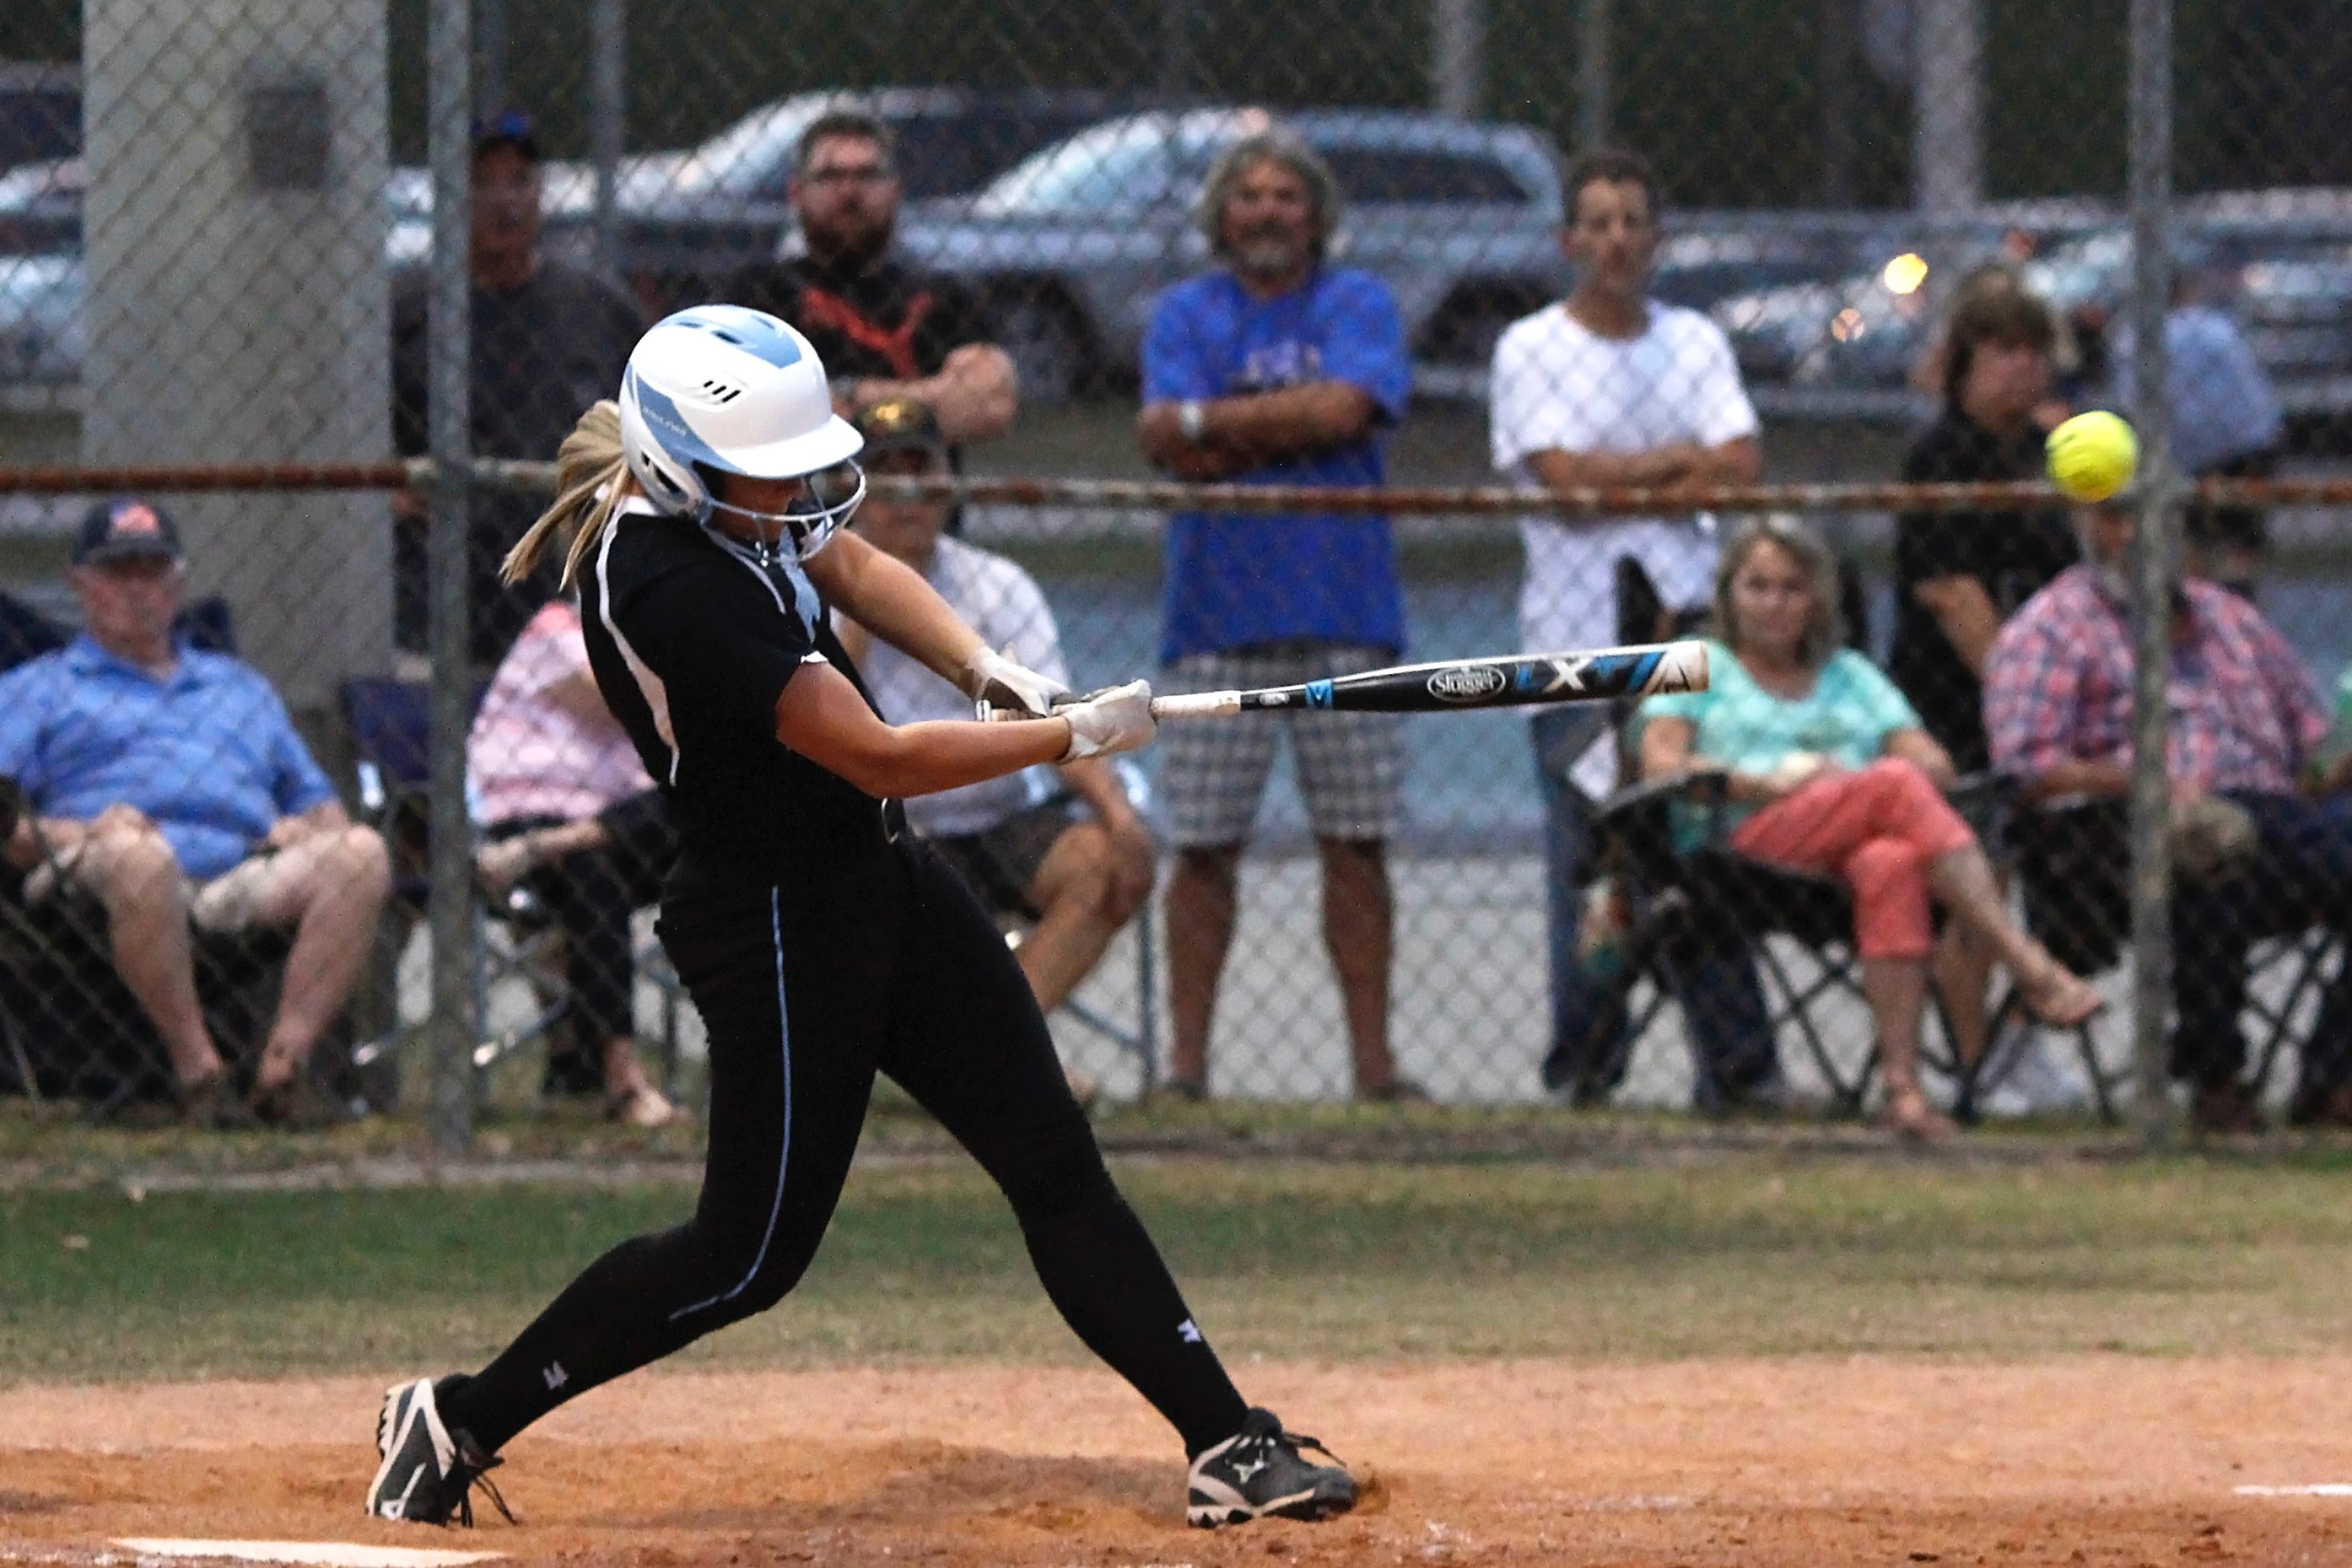 Ponte Vedra’s Bailey Wagoner hits a liner to center field.